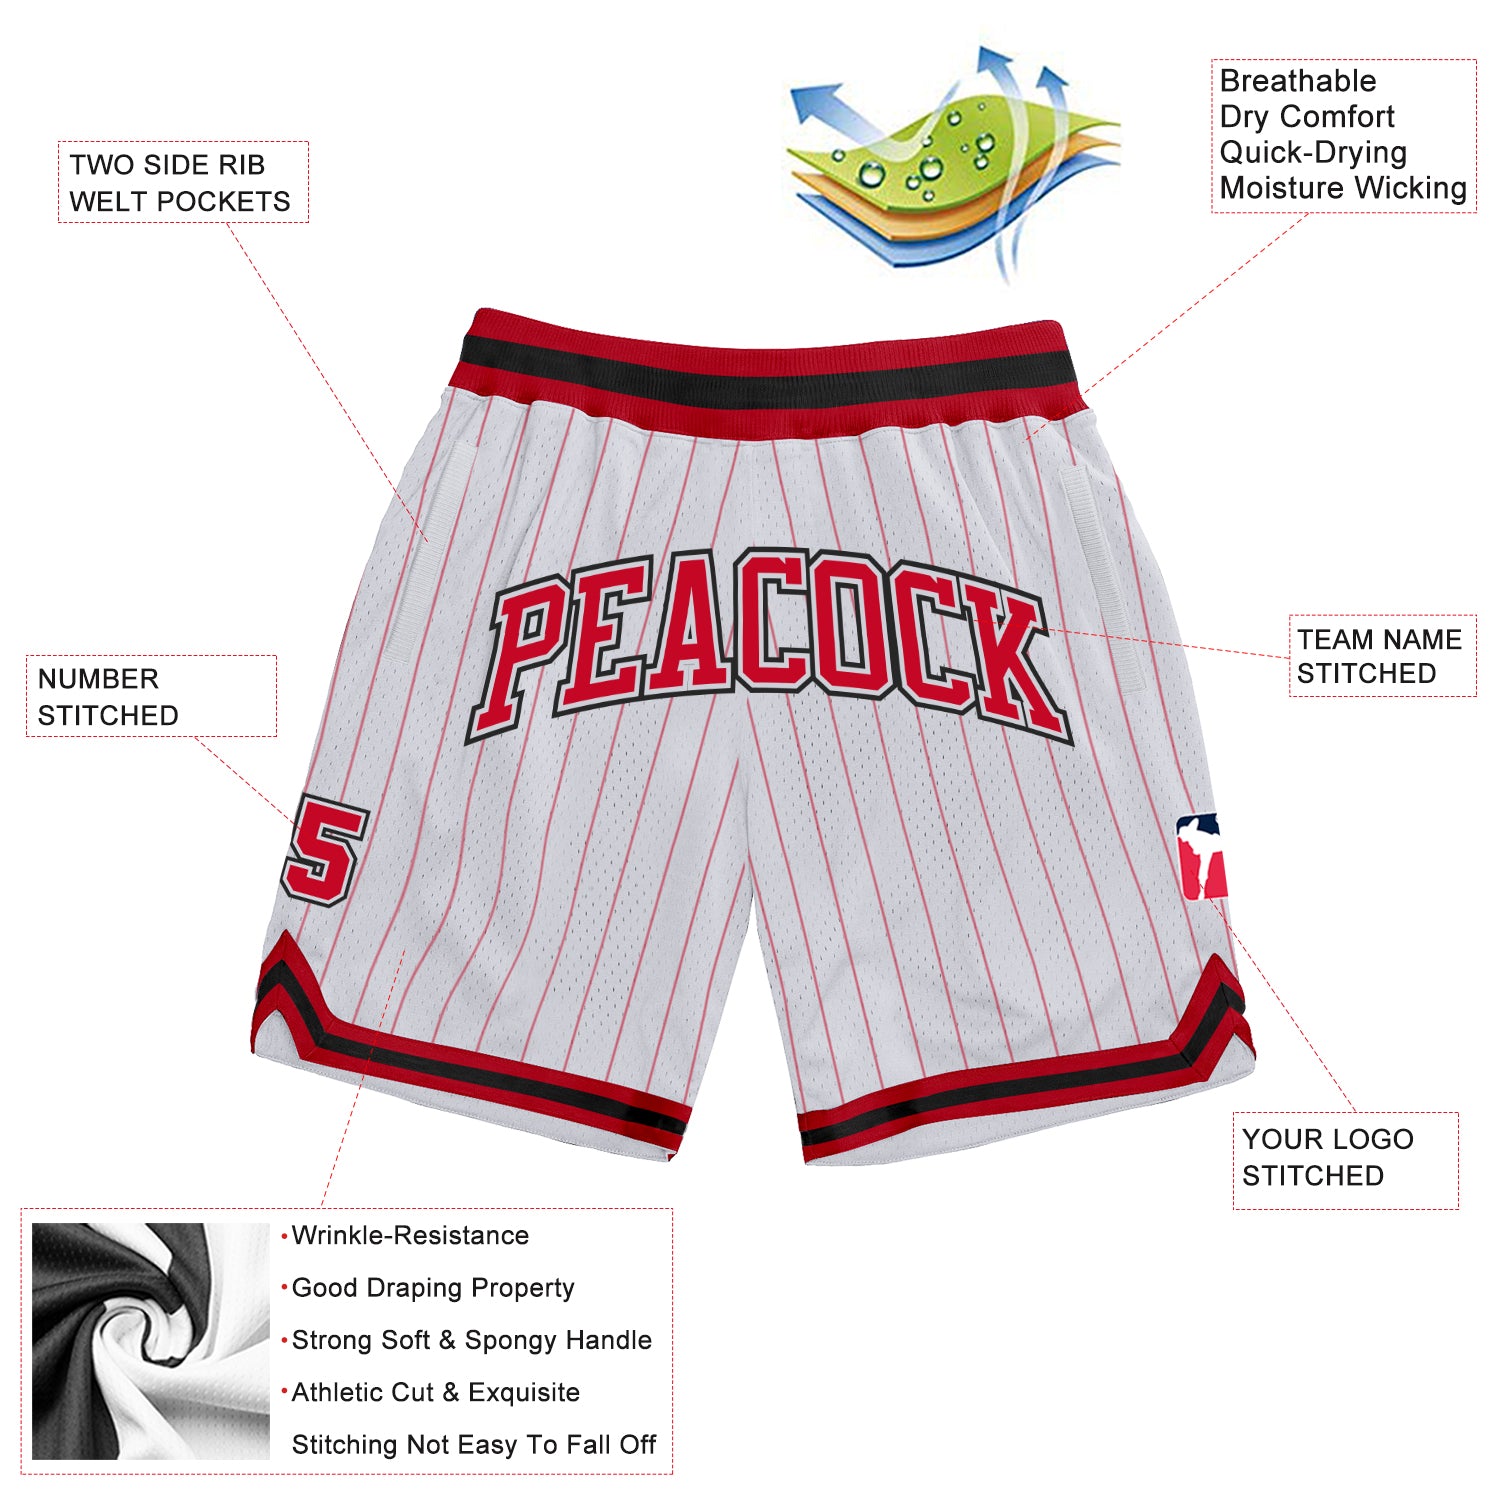 Custom White Red Pinstripe Red-Black Authentic Basketball Shorts